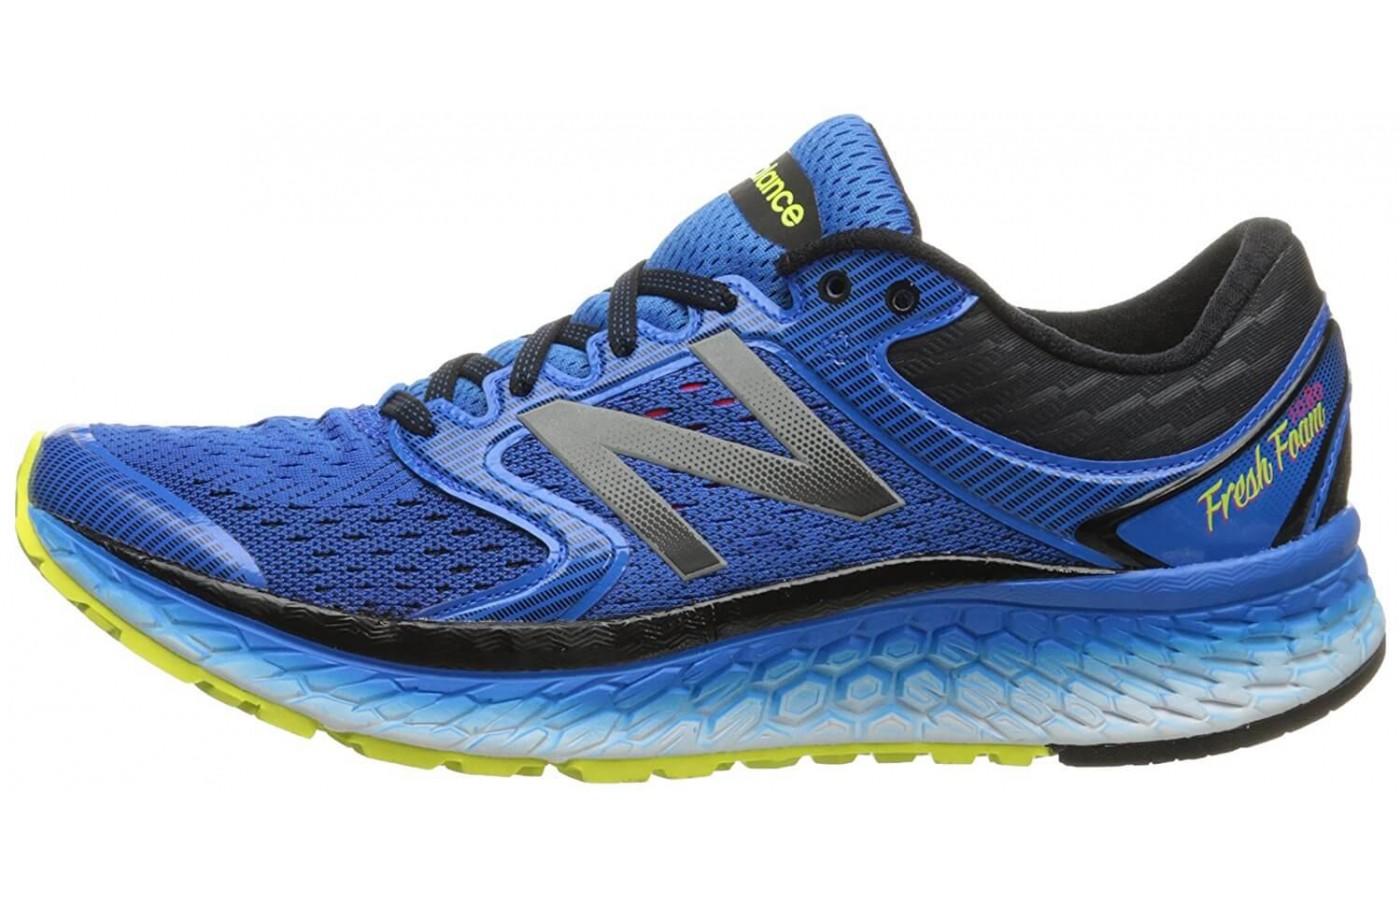 Exterior side view of the New Balance Fresh Foam 1080 v7